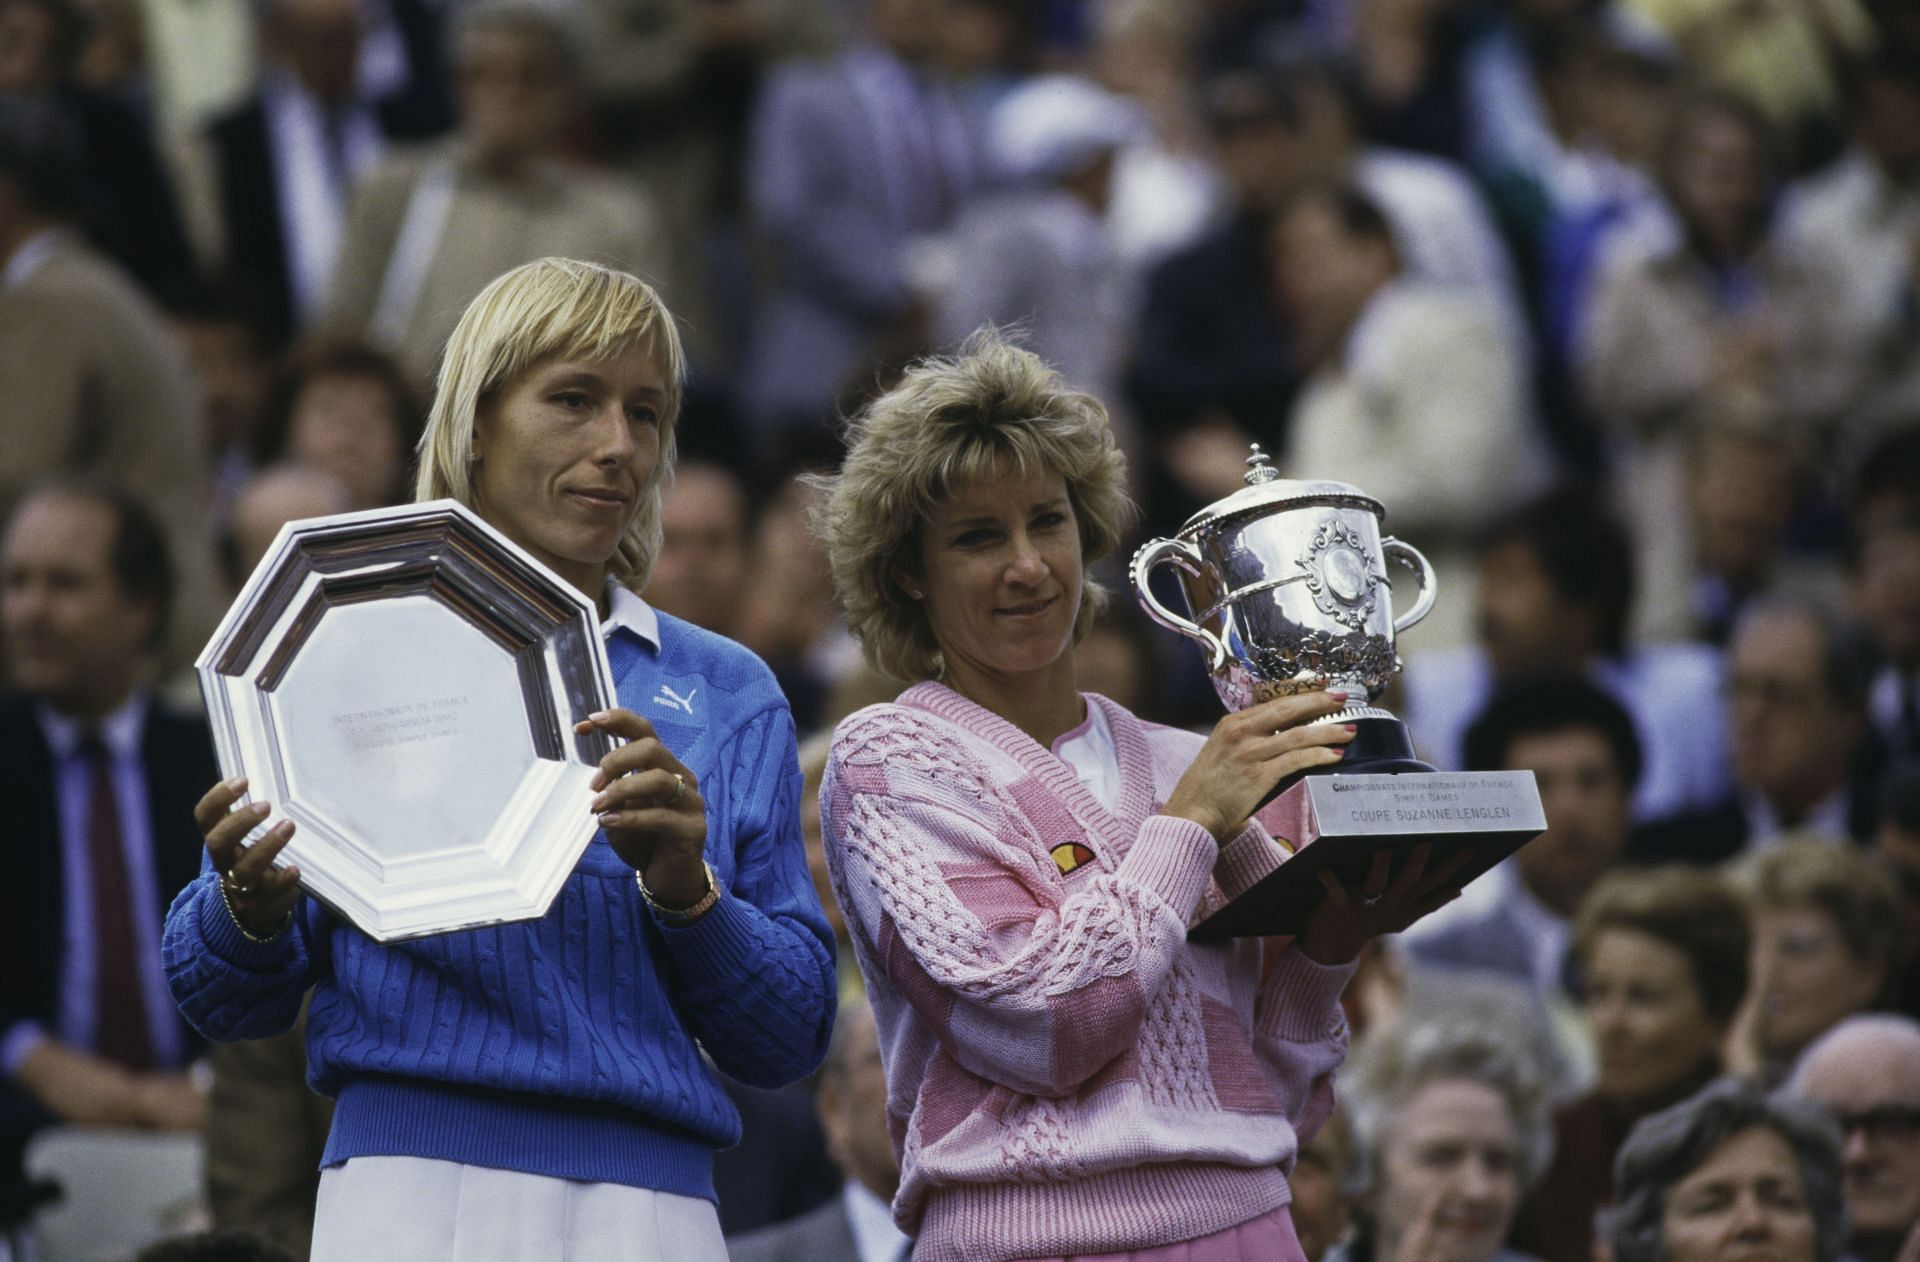 Navratilova and Evert clashed 80 times in their careers